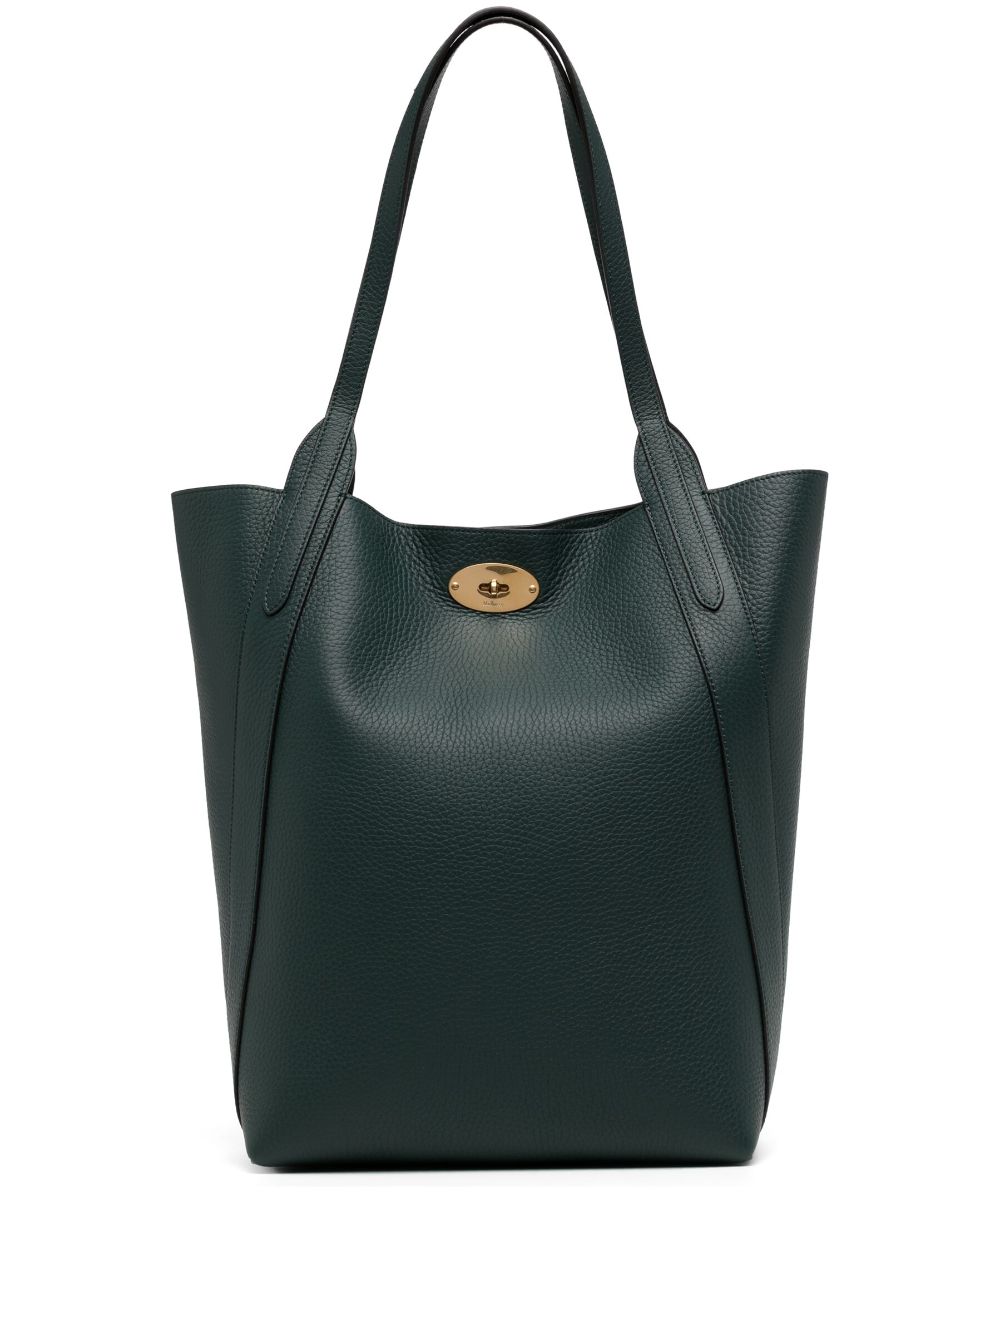 Mulberry Bayswater leather tote bag - Green von Mulberry